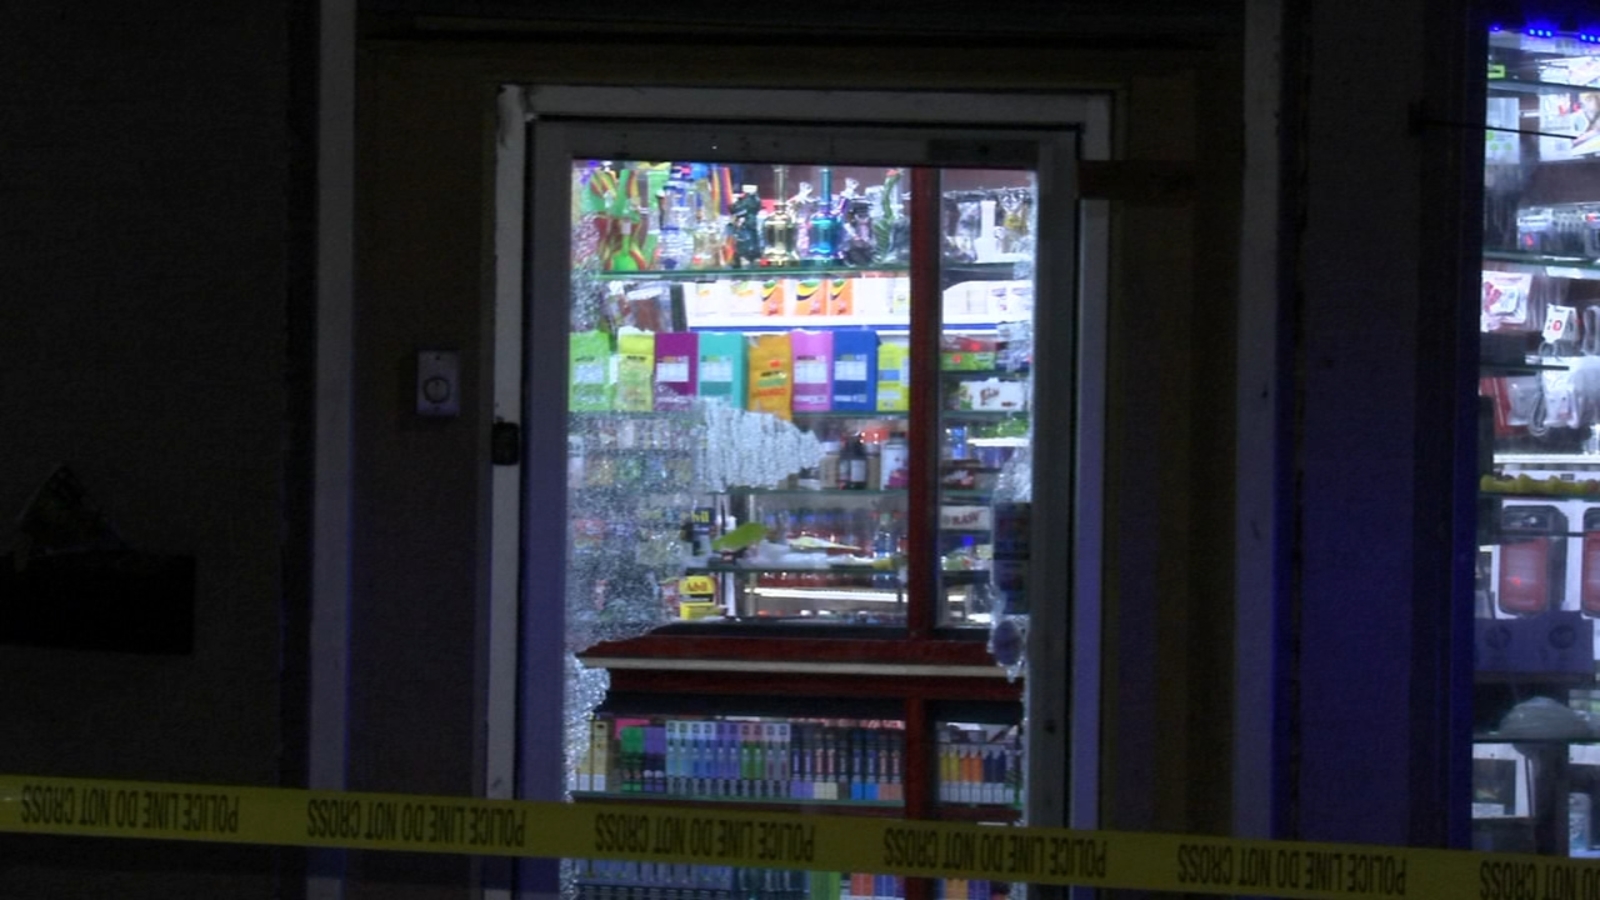 Smoke shop armed robbery suspect shot to death, victim hospitalized in Olney: Police